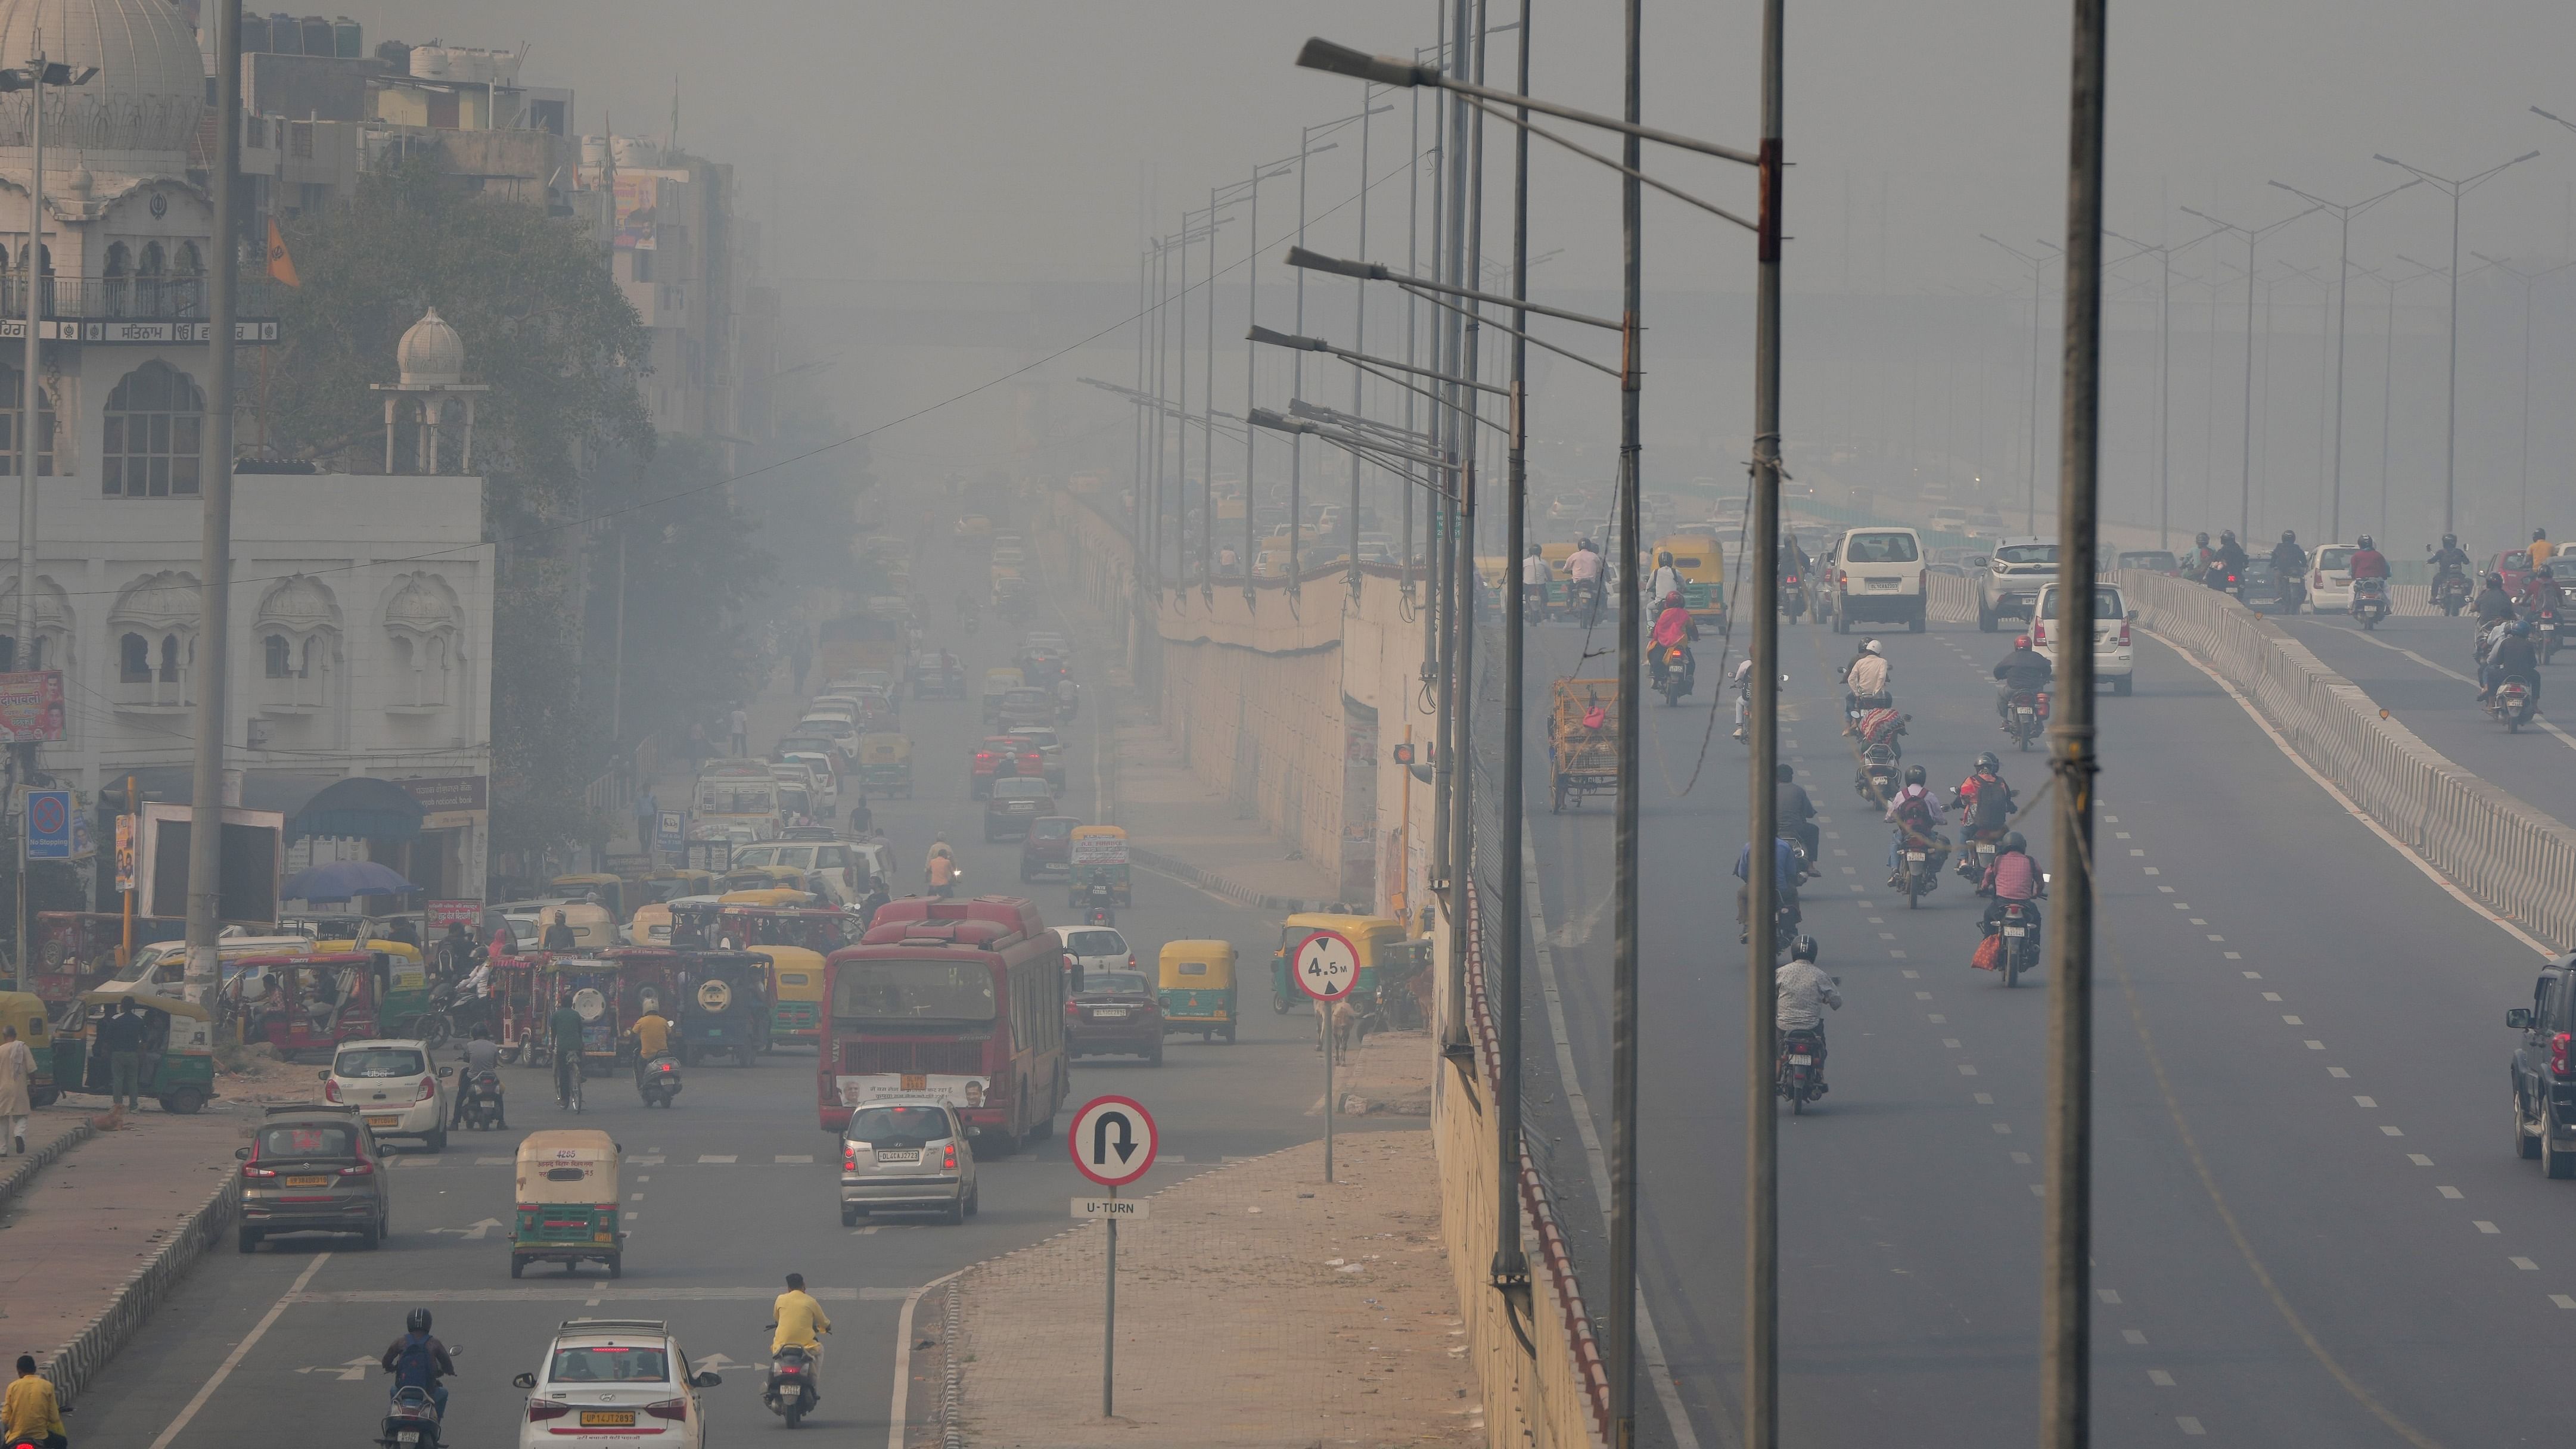 An AQI between zero and 50 is considered "good", 51 and 100 "satisfactory", 101 and 200 "moderate", 201 and 300 "poor", 301 and 400 "very poor", and 401 and 500 "severe". Credit: AFP Photo